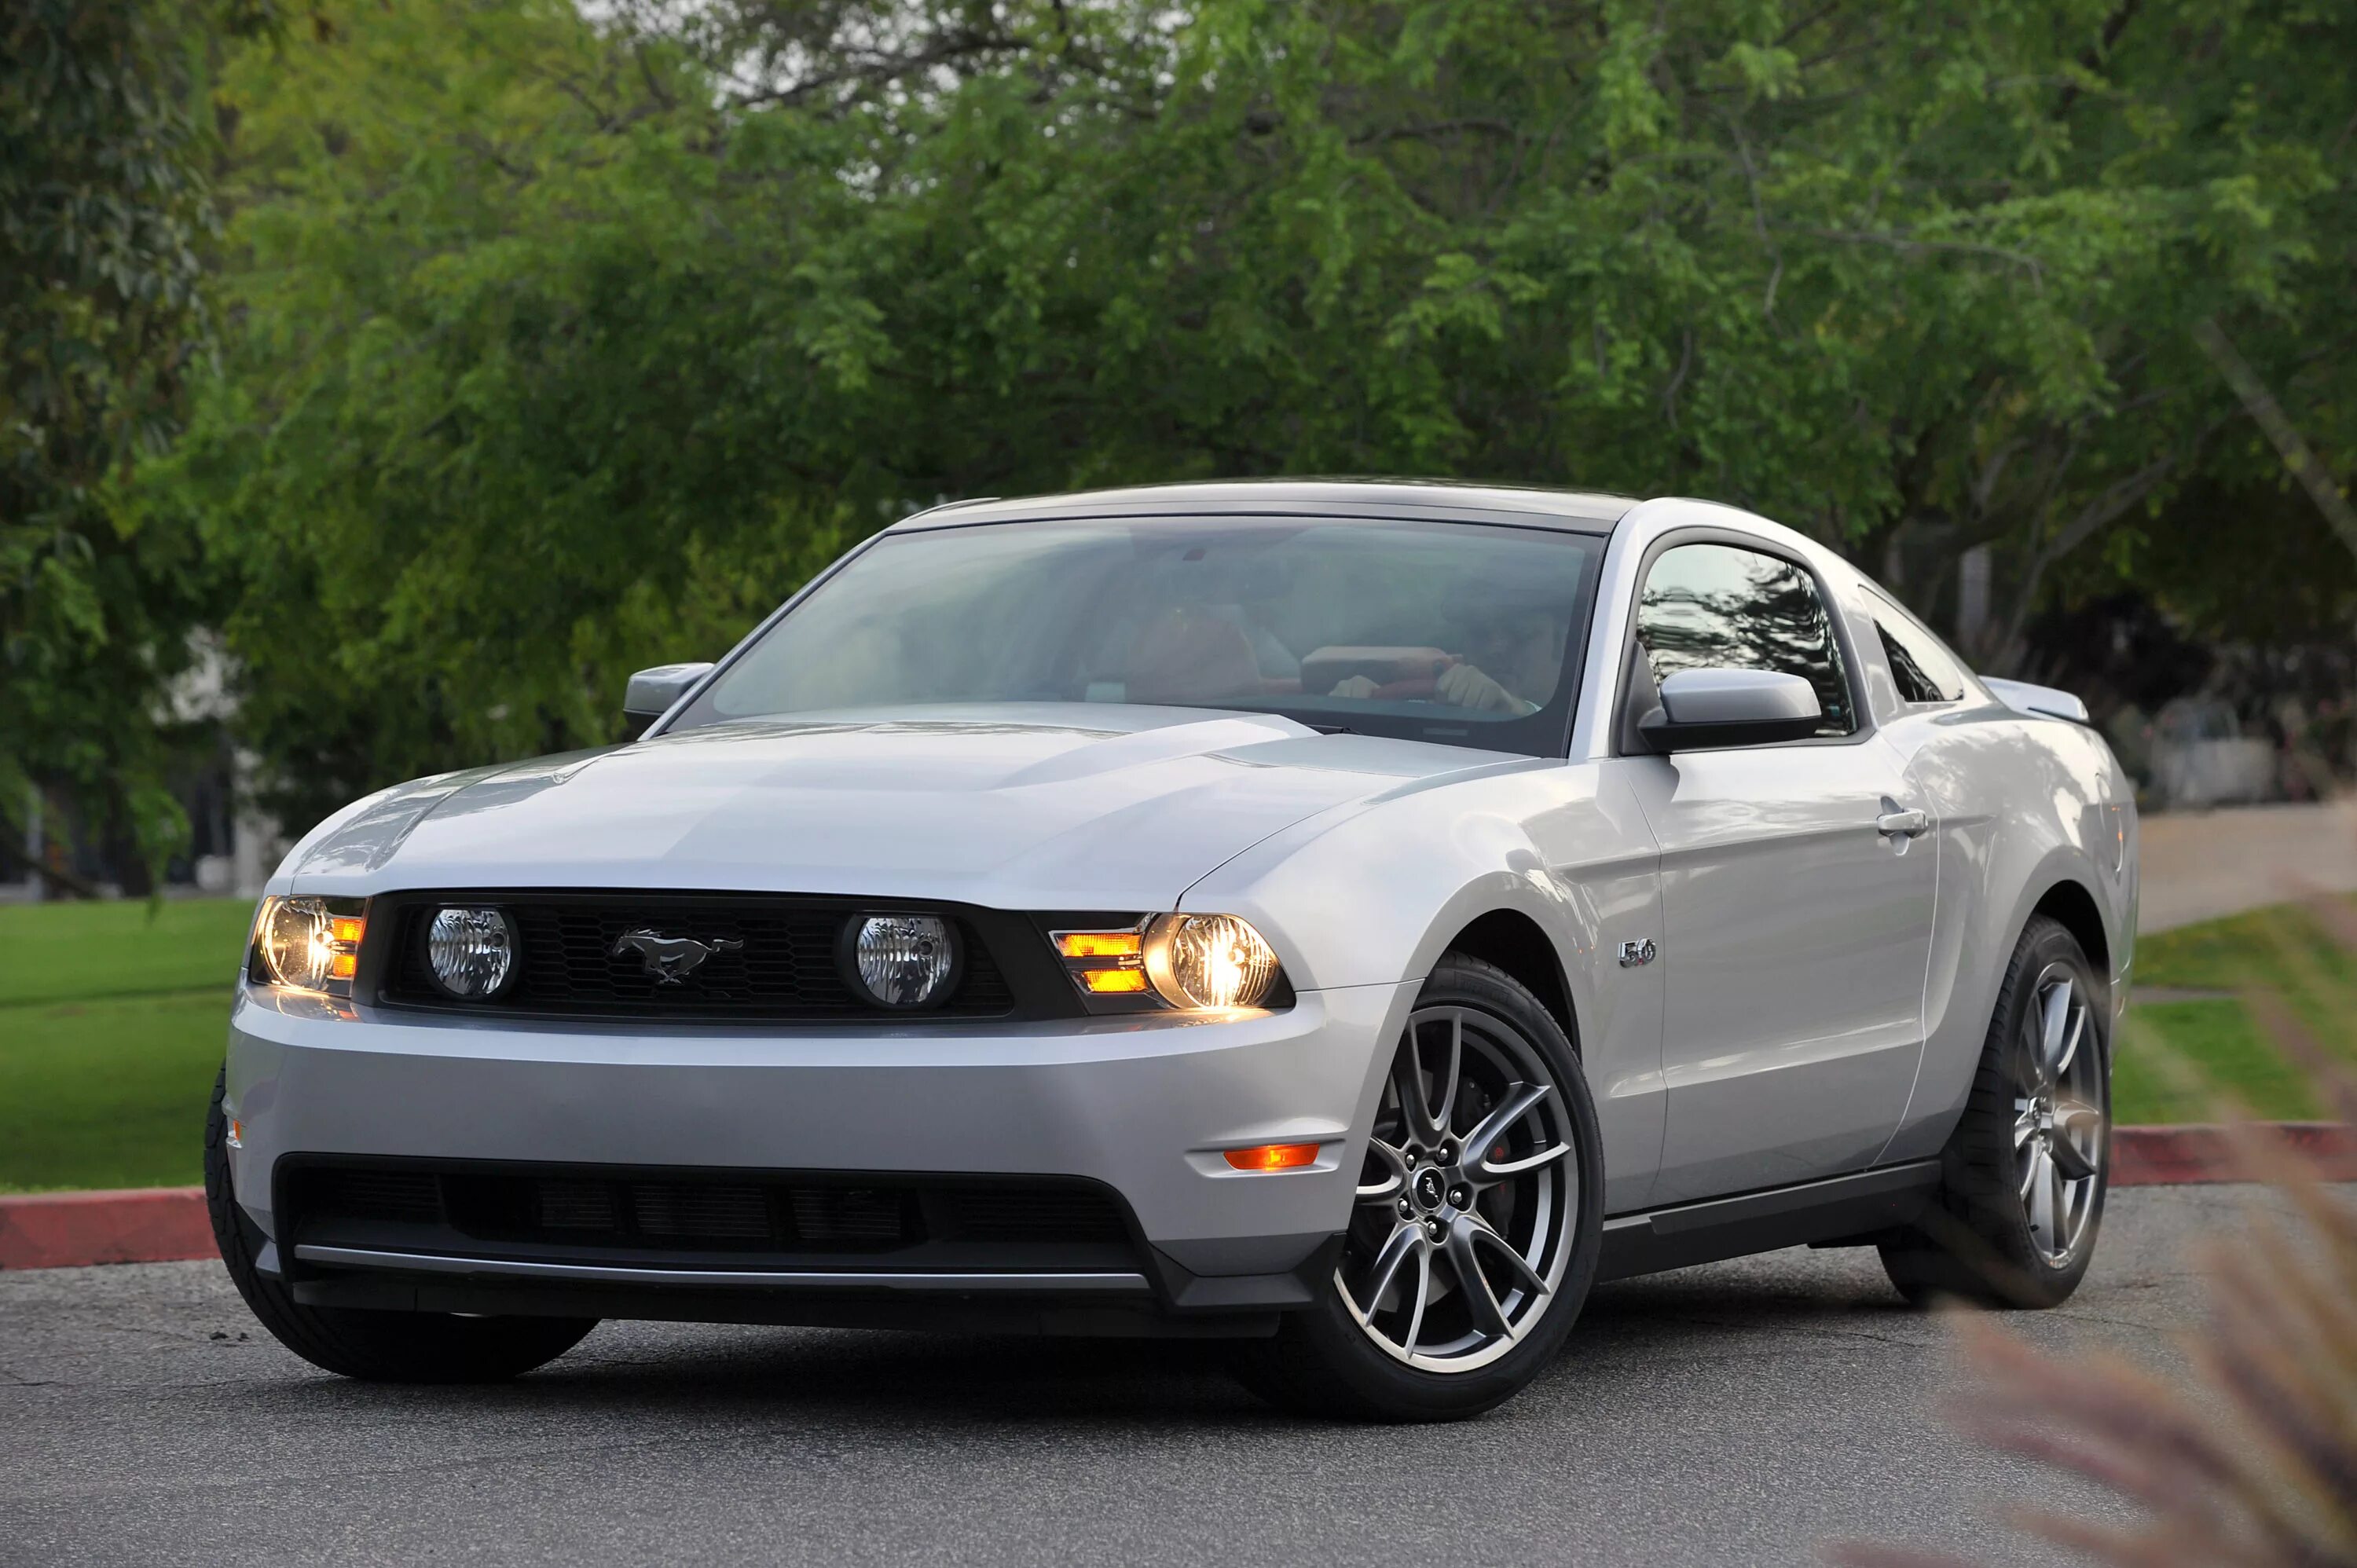 Форд мустанг 5.0. 2010 Ford Mustang 5.0 gt. Ford Mustang gt 5.0. Ford Mustang 5.0 2011.